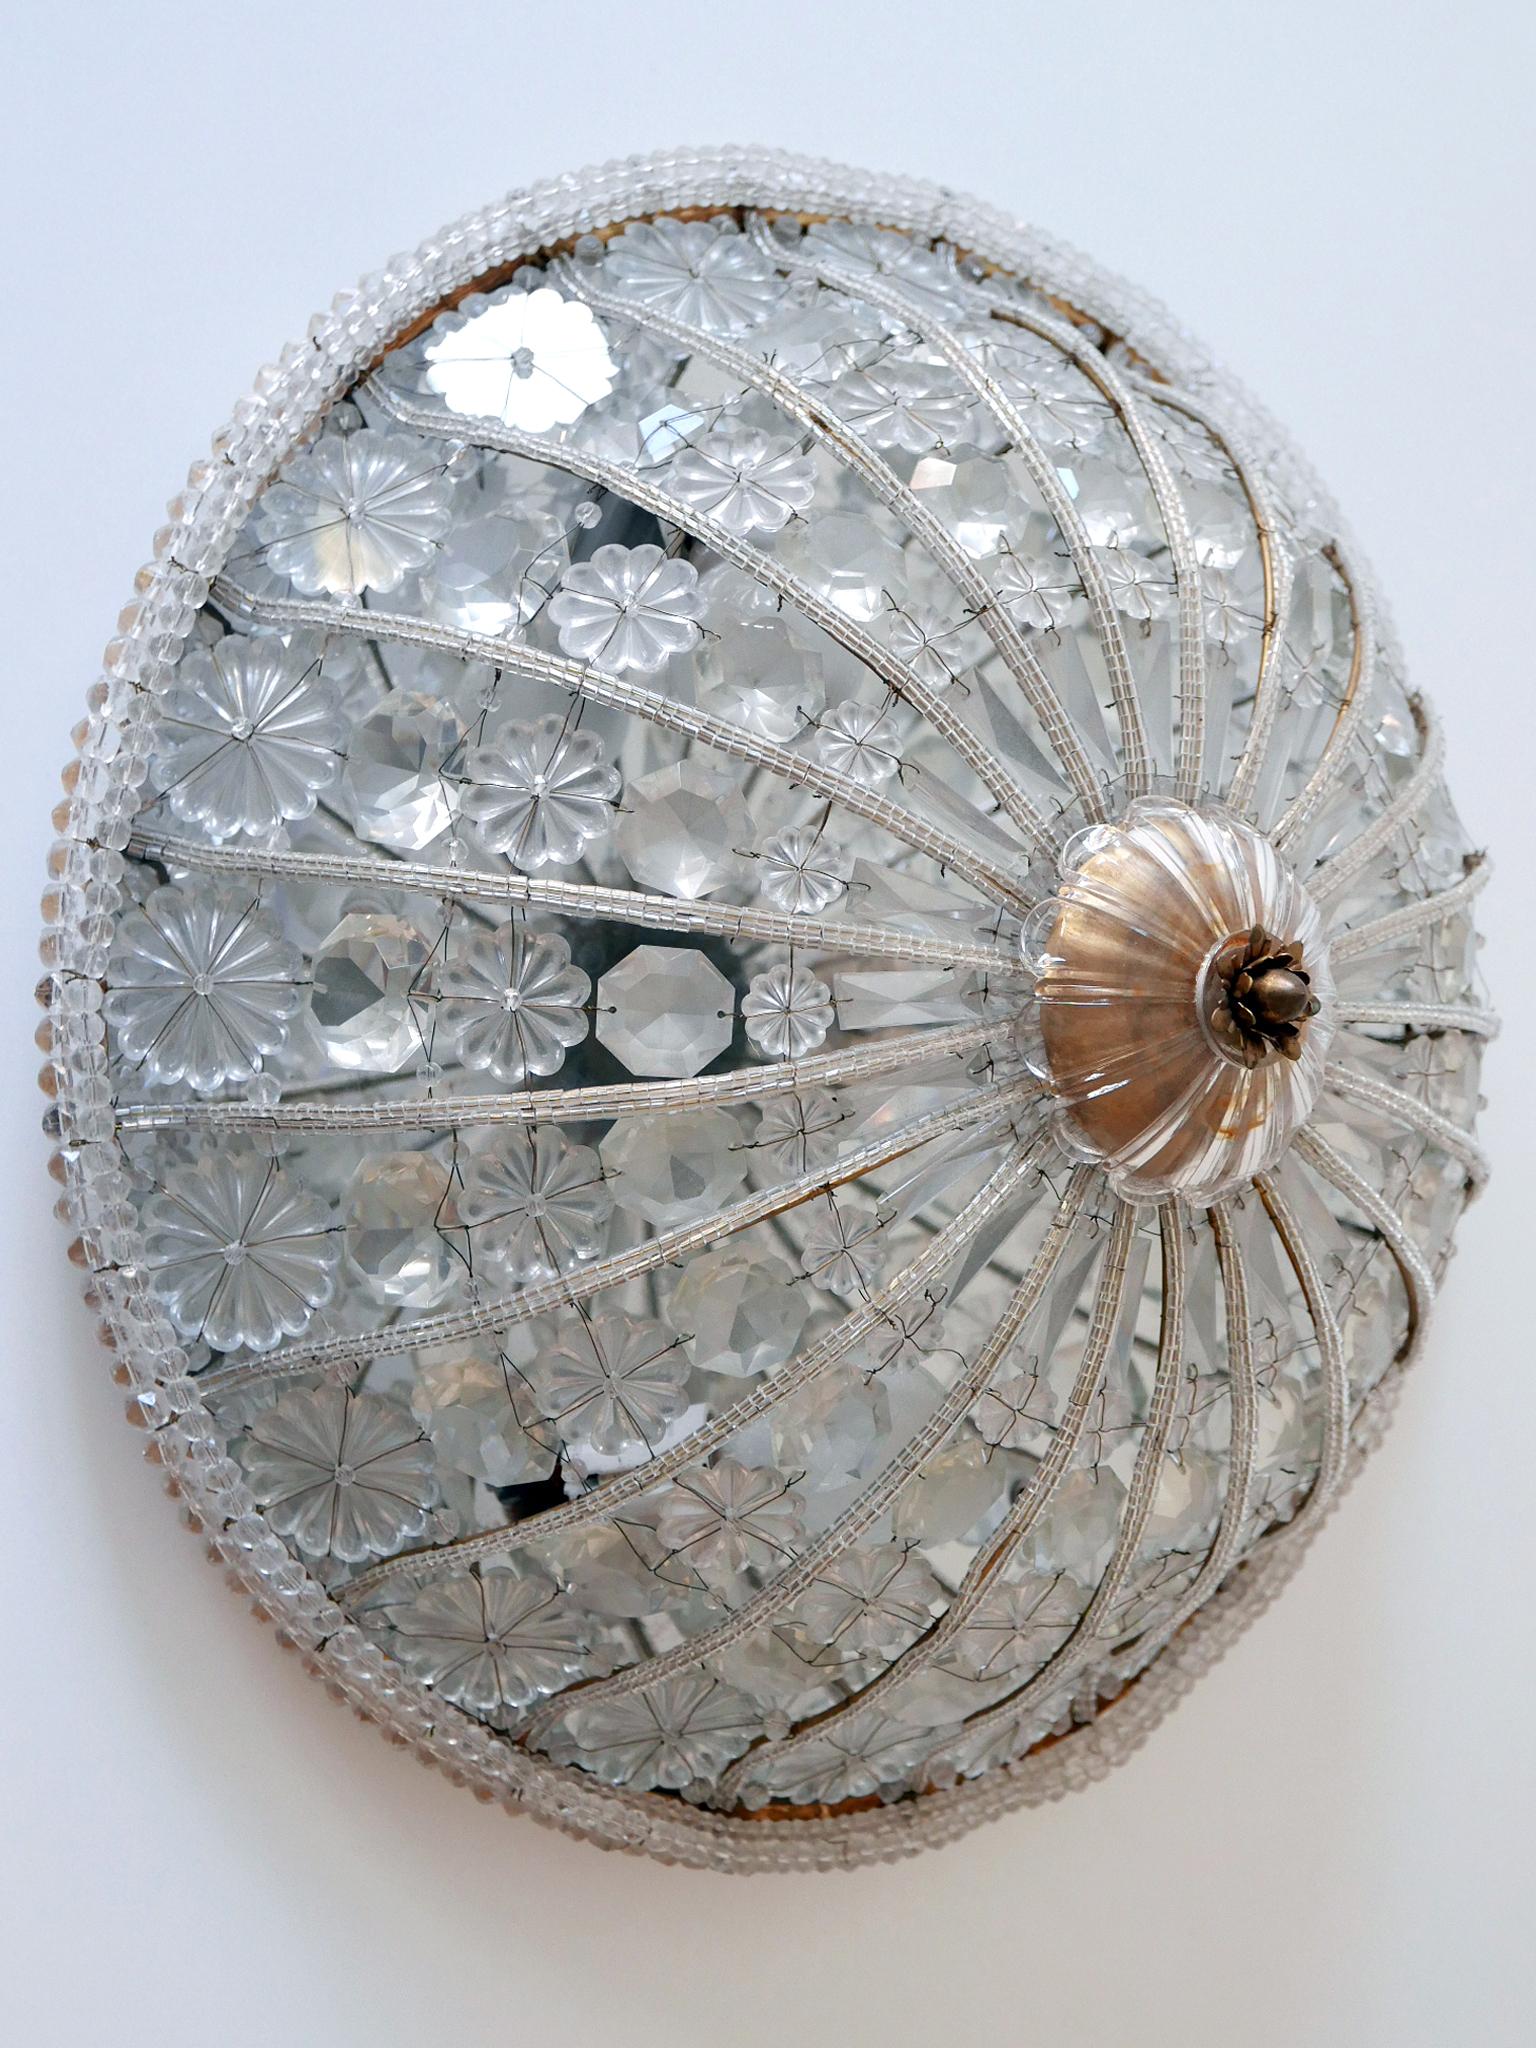 Large Mid-Century Modern Crystal Glass Flush Mount or Wall Lamp Germany, 1950s For Sale 7